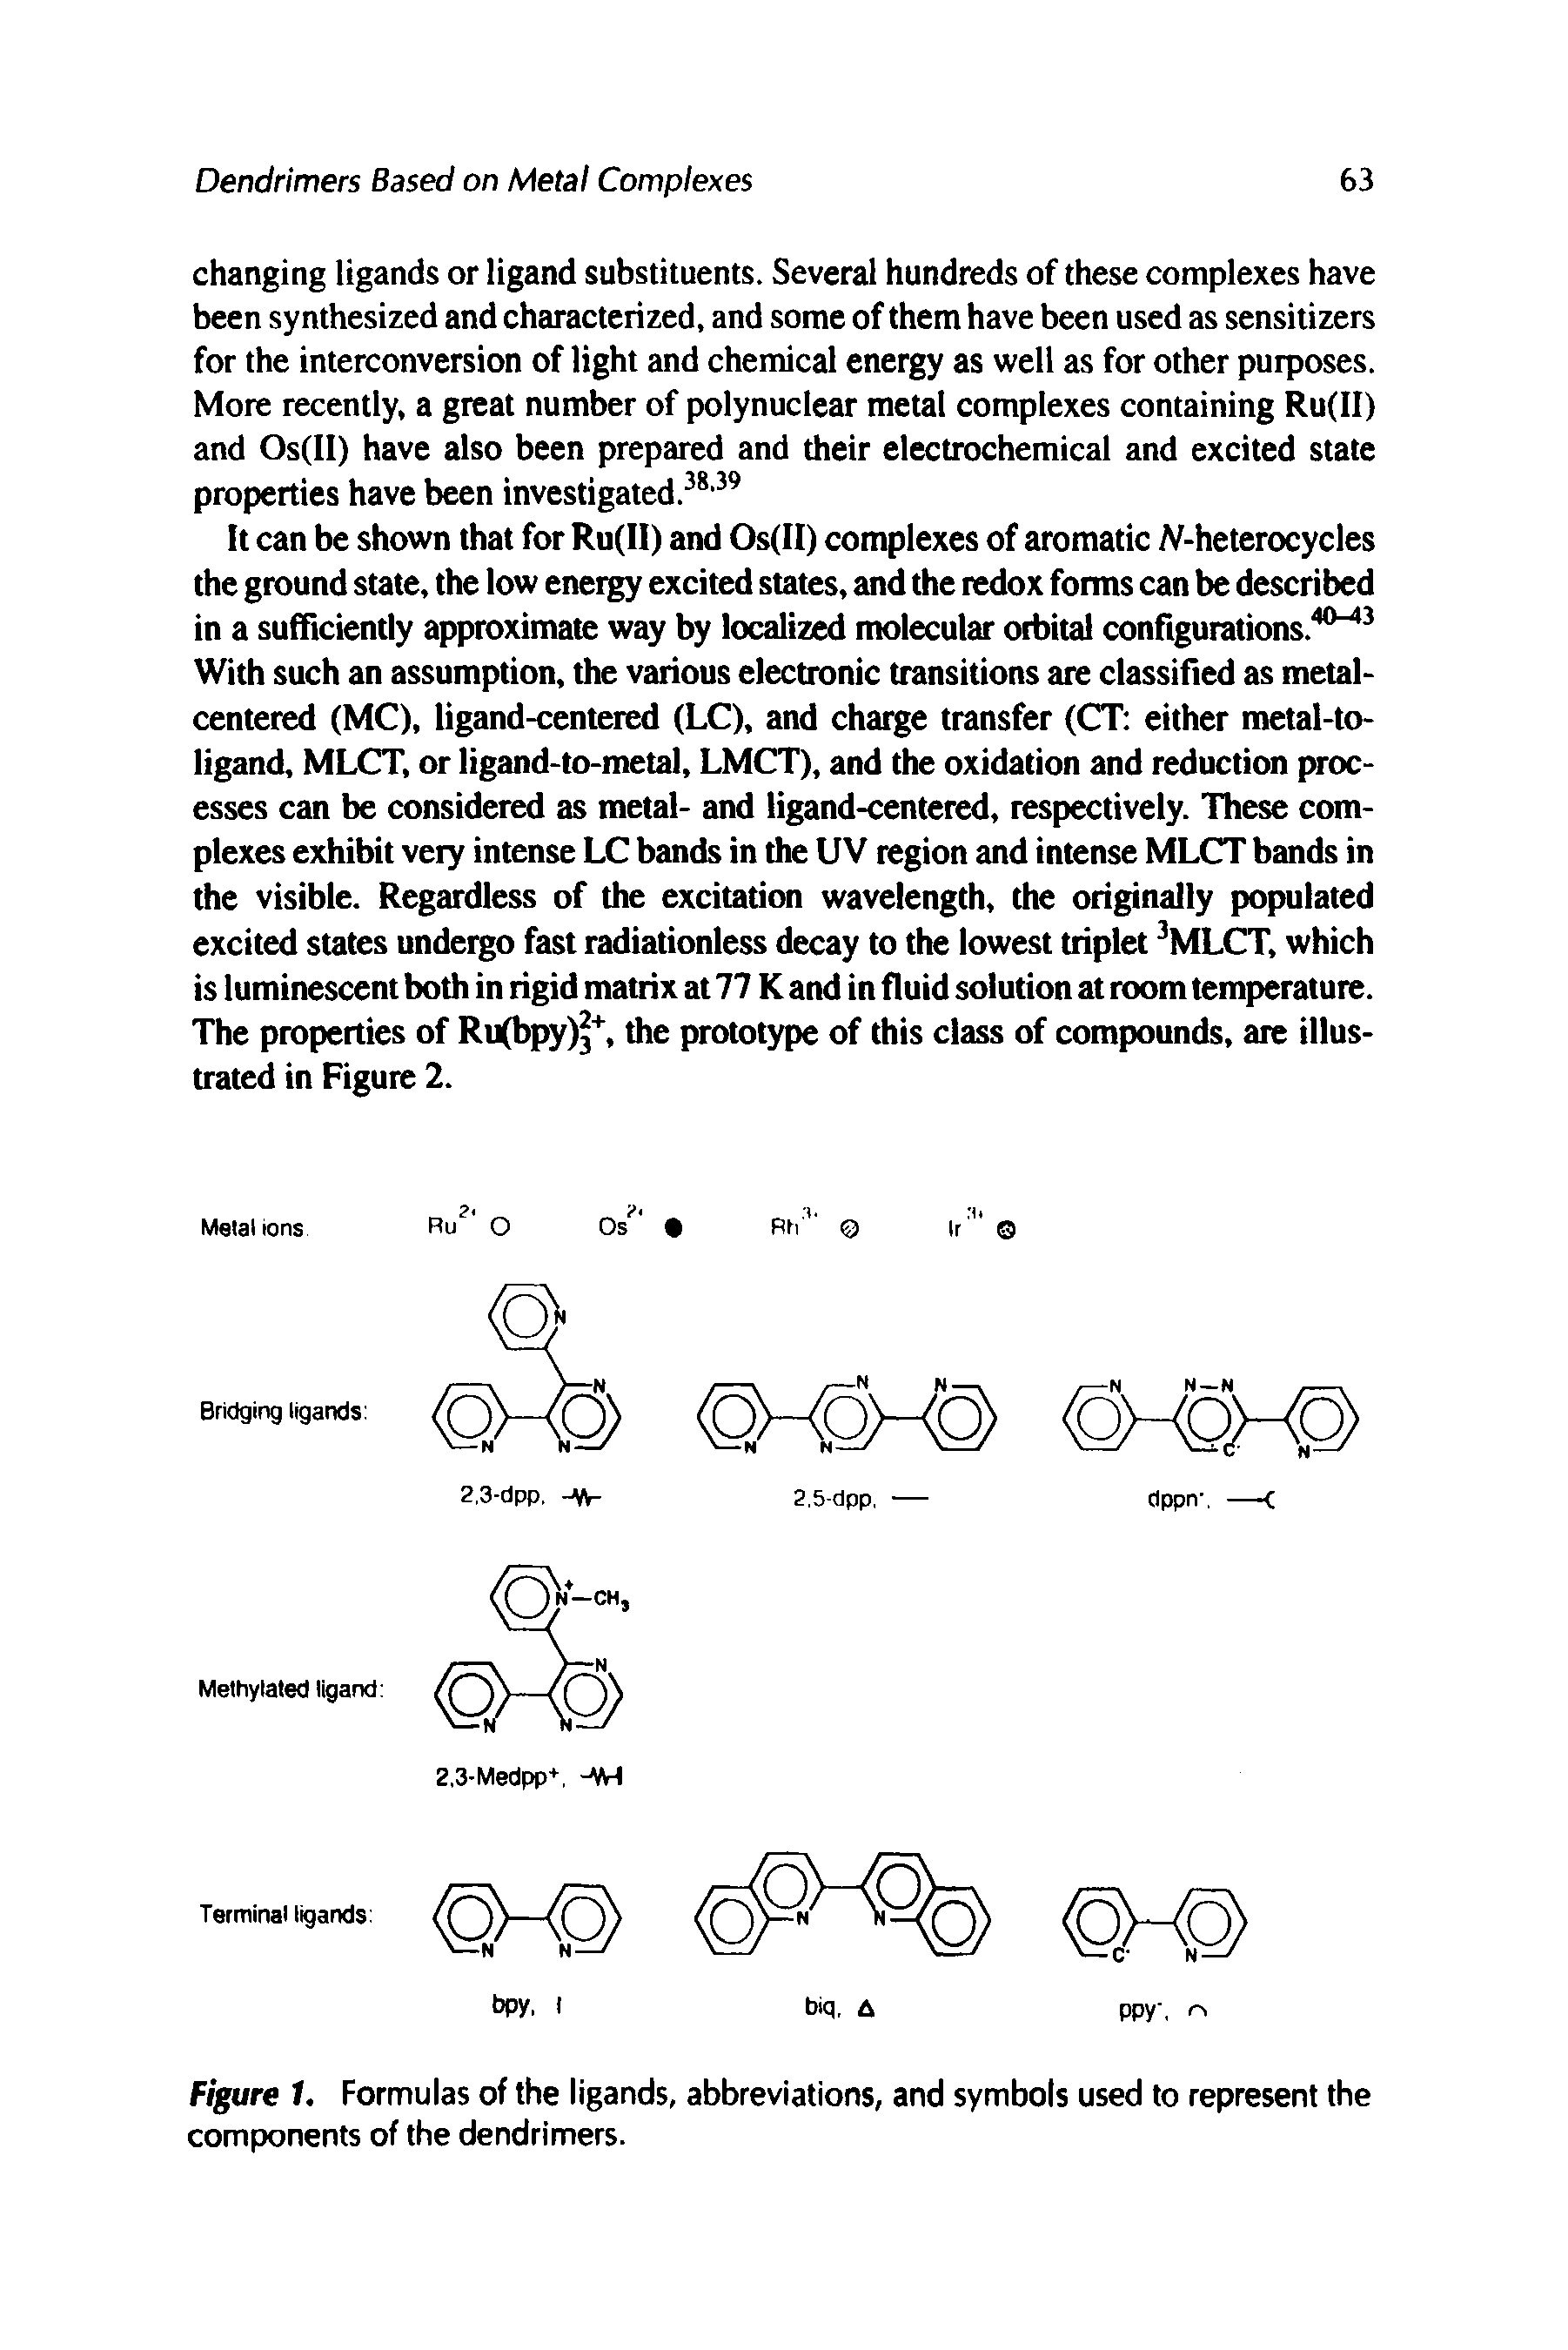 Figure 1. Formulas of the ligands, abbreviations, and symbols used to represent the components of the dendrimers.